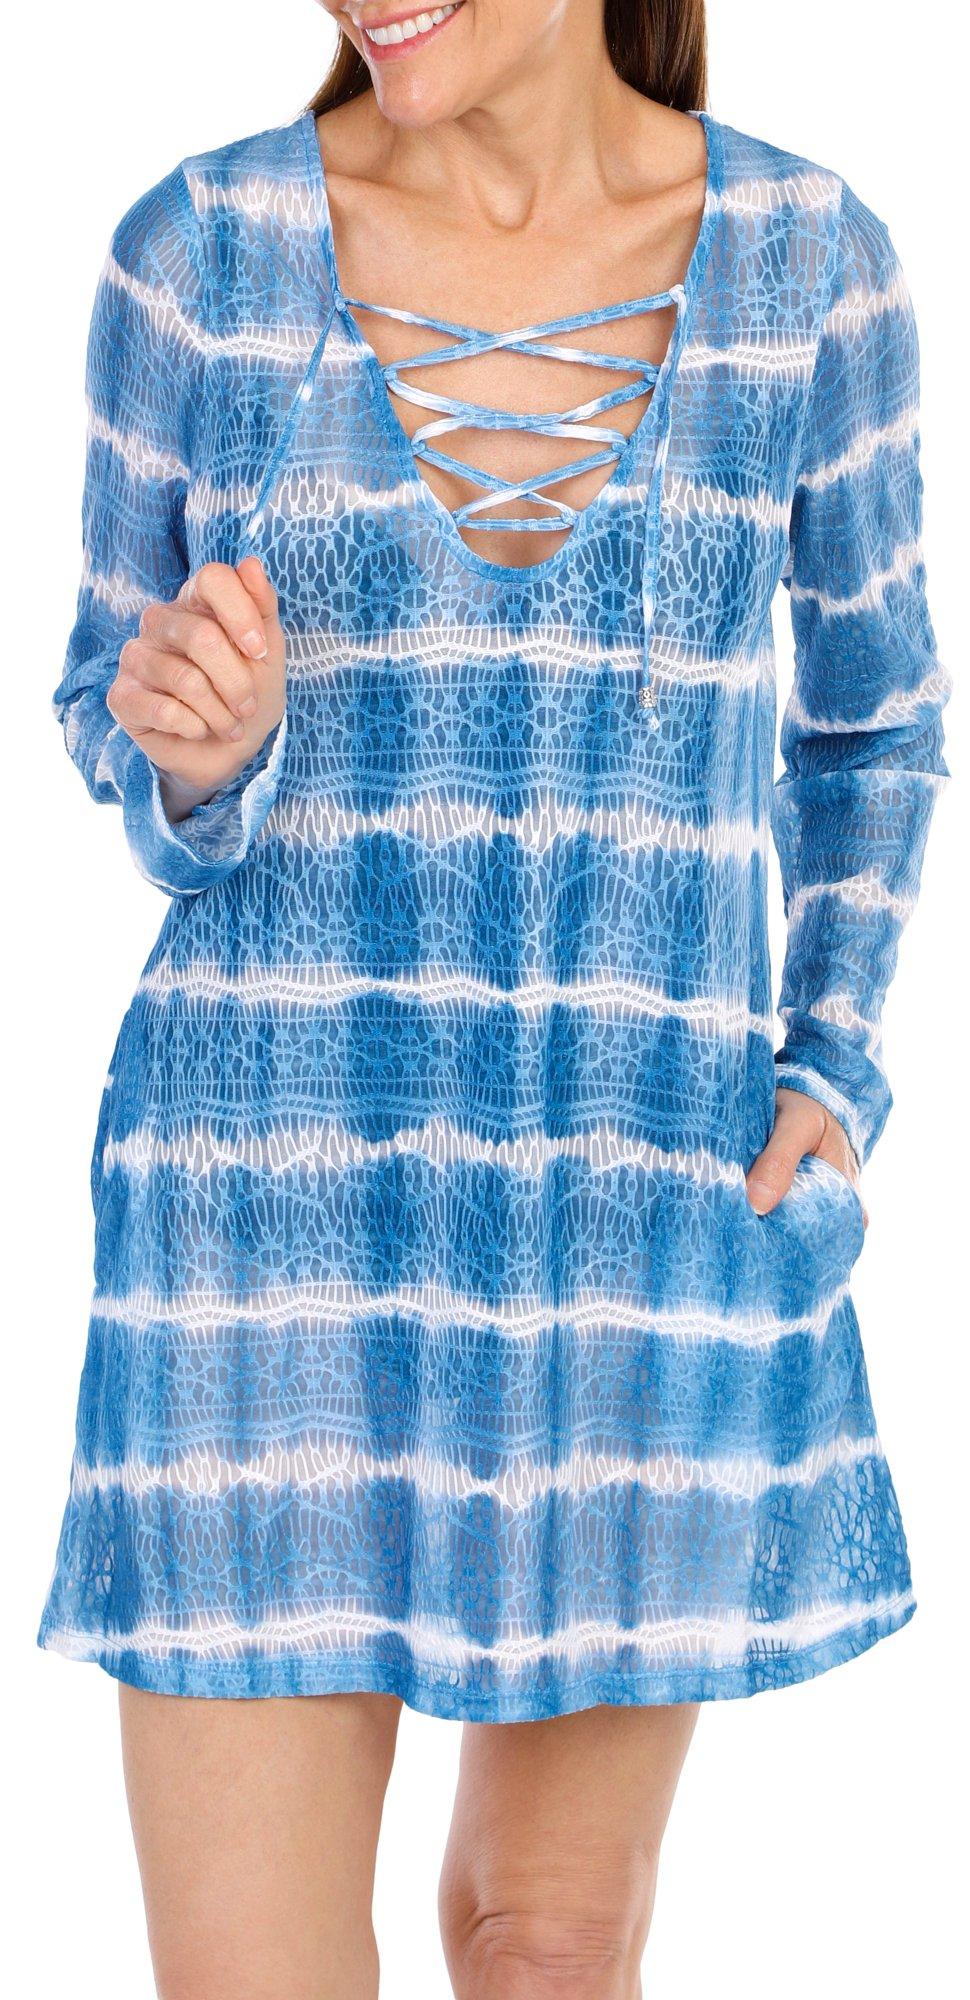 Women's Striped Swimsuit Cover Up